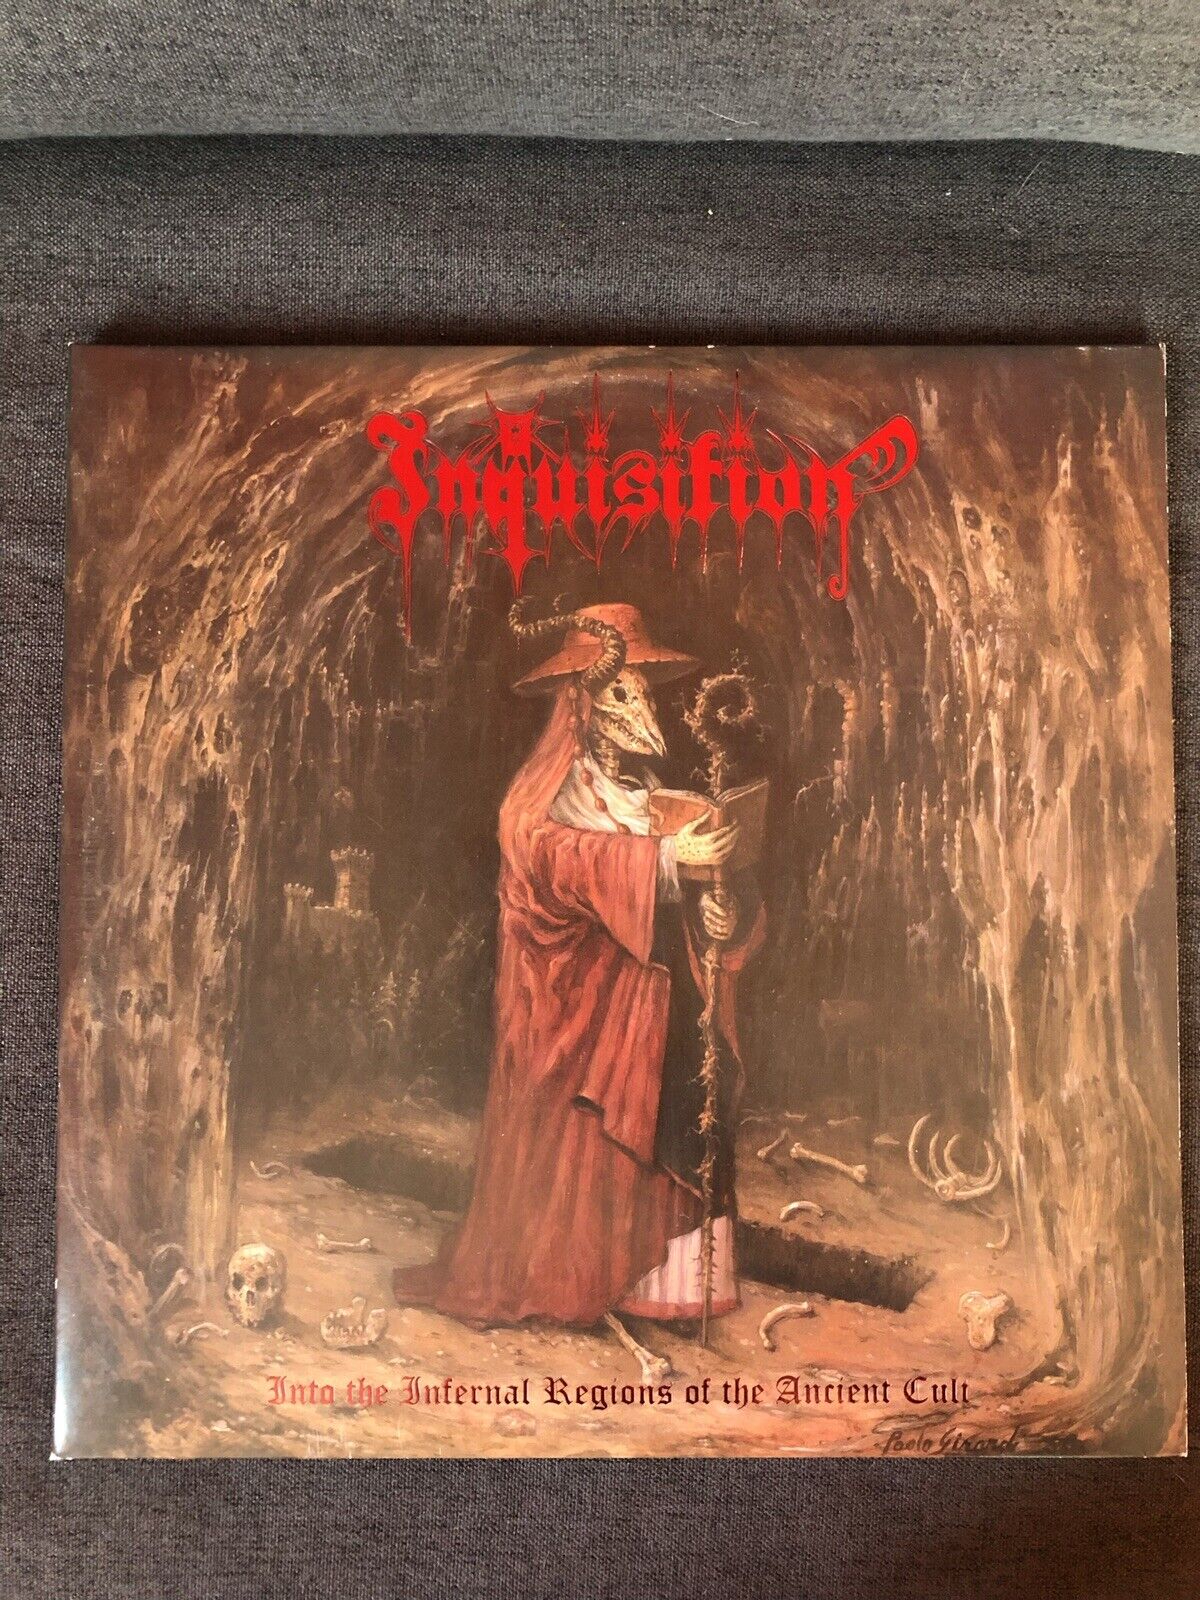 INQUISITION-INTO THE INFERNAL REGIONS OF THE ANCIENT CULT VINYL NEW